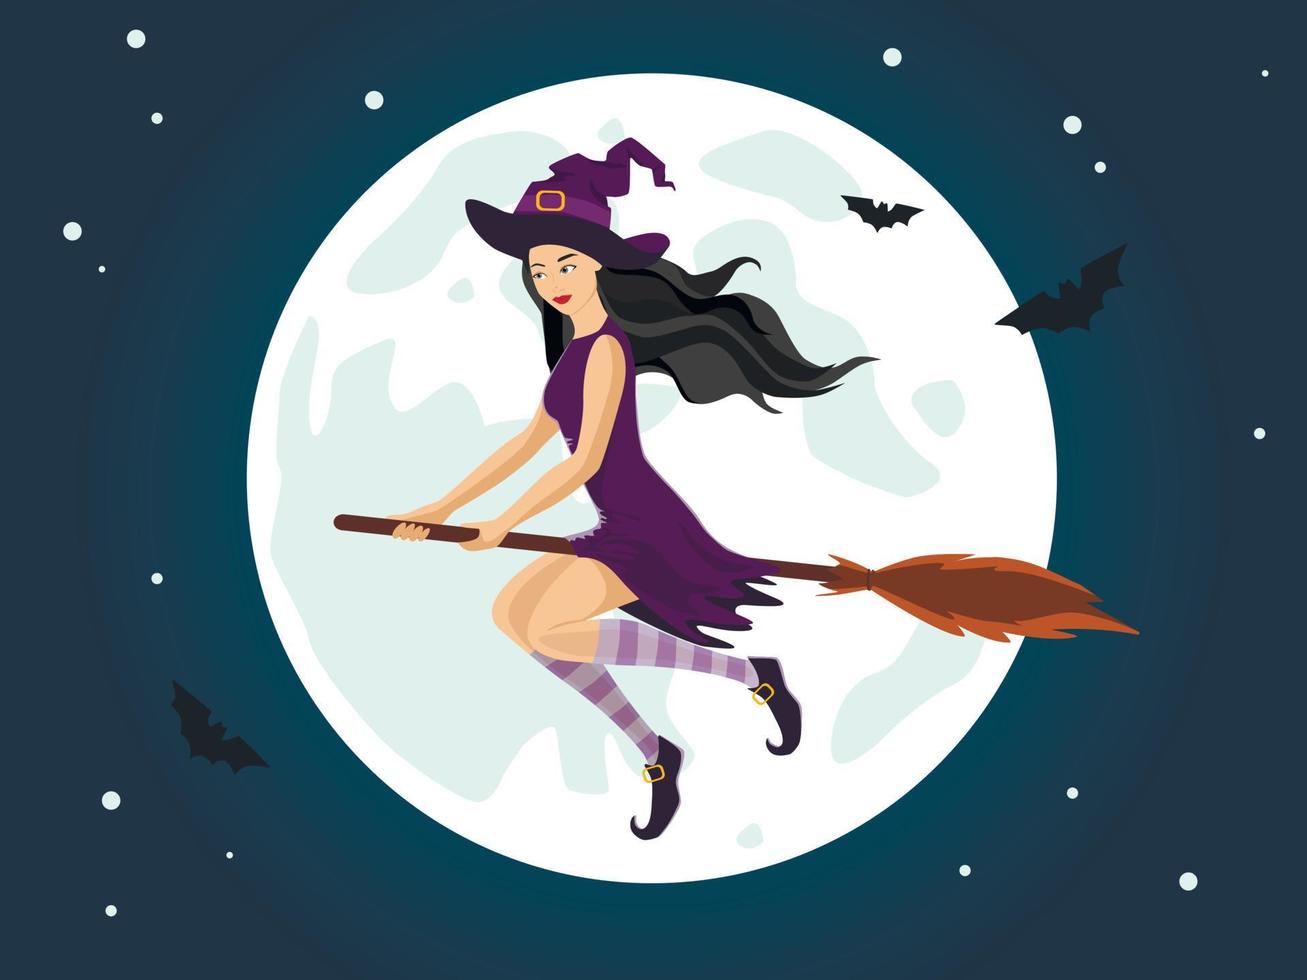 Witch flies on a broom at night sky with full moon. Girl in halloween costume with witch hat. vector